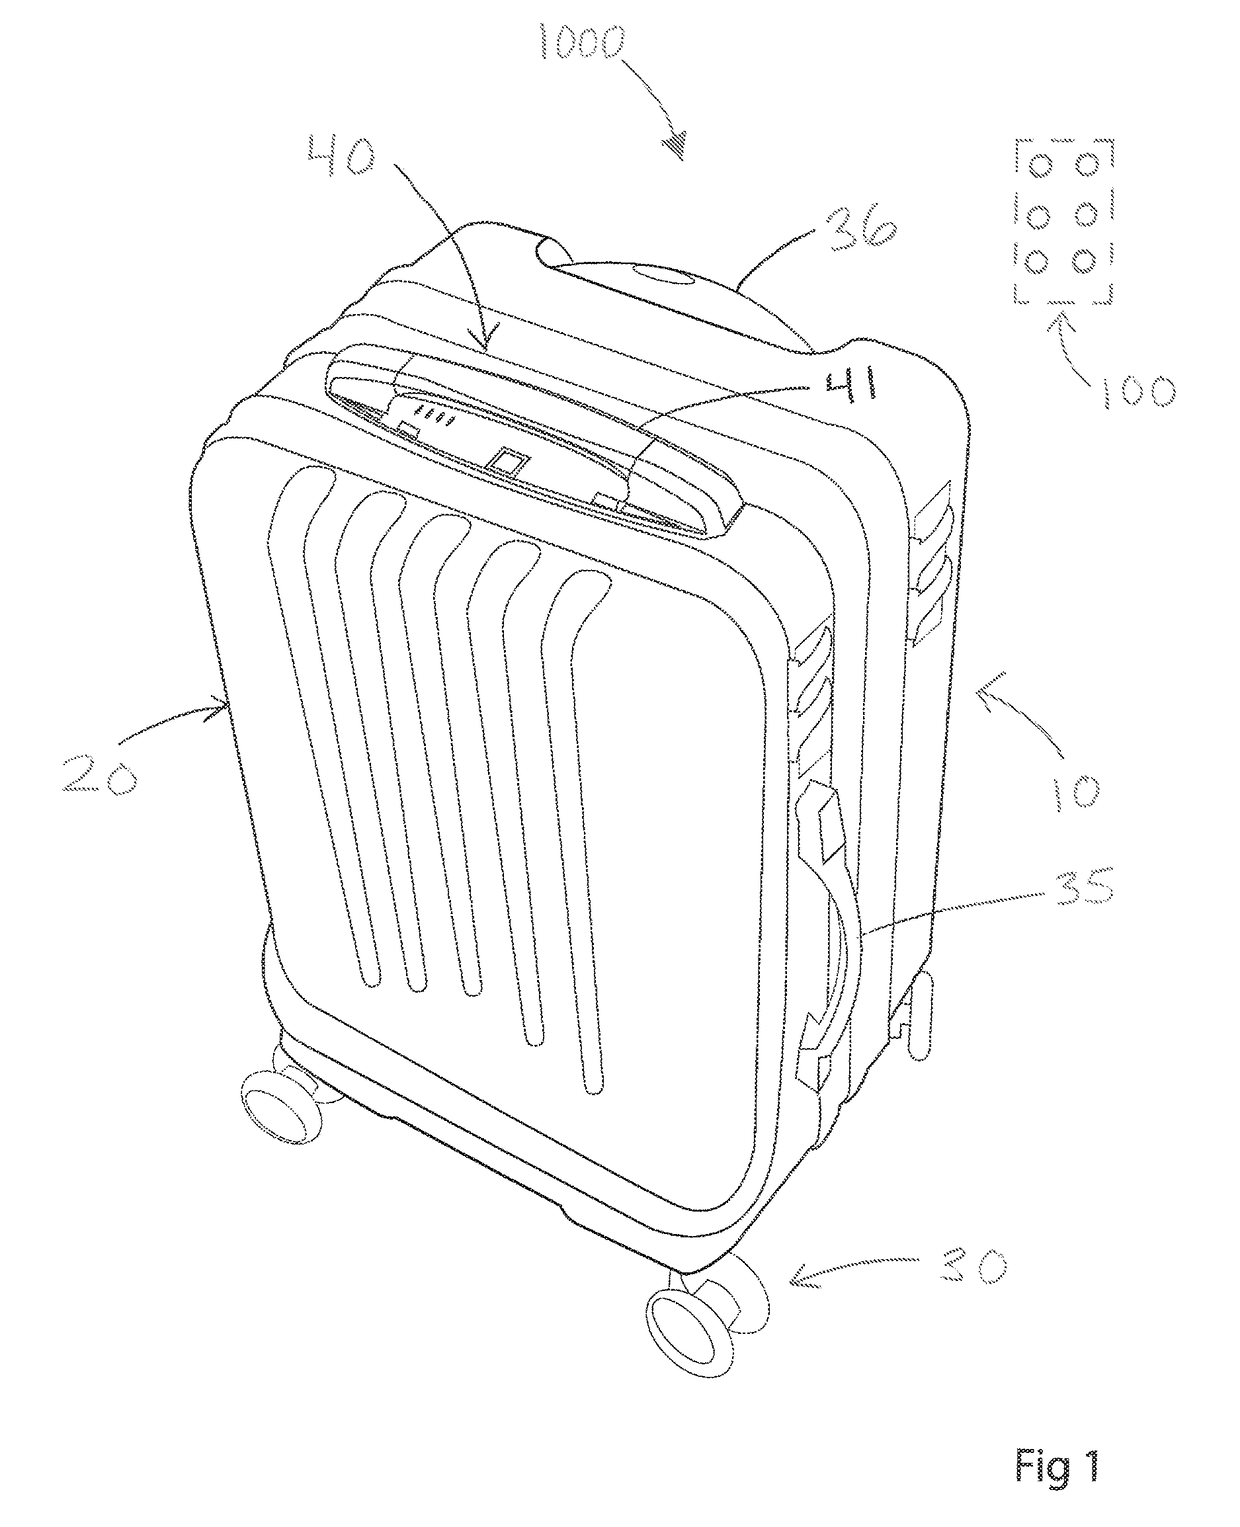 Smart luggage system